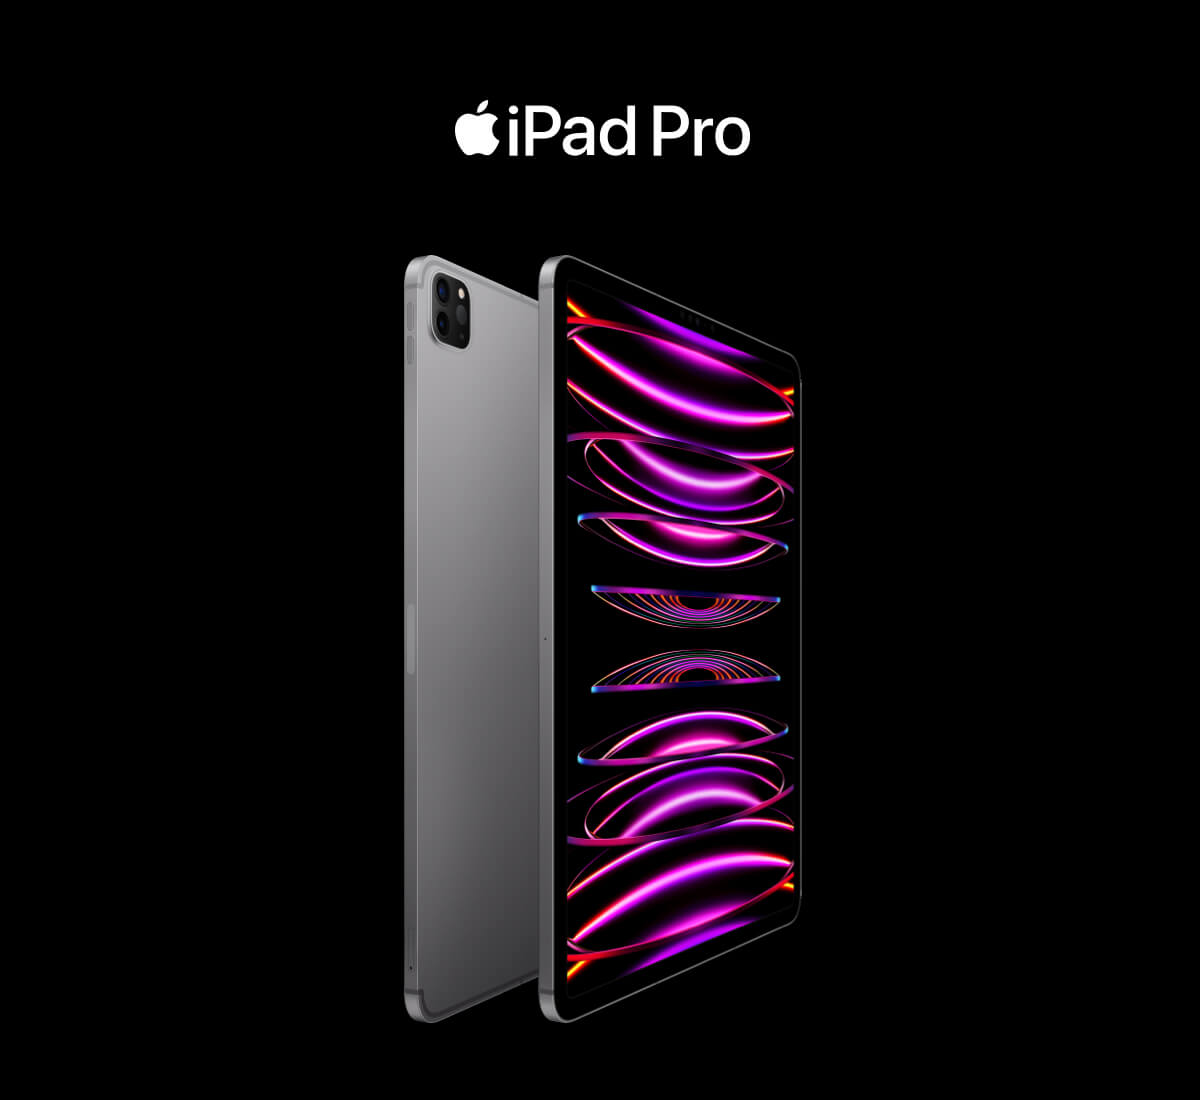 2 iPad Pro, shown front and back with a purple screen.